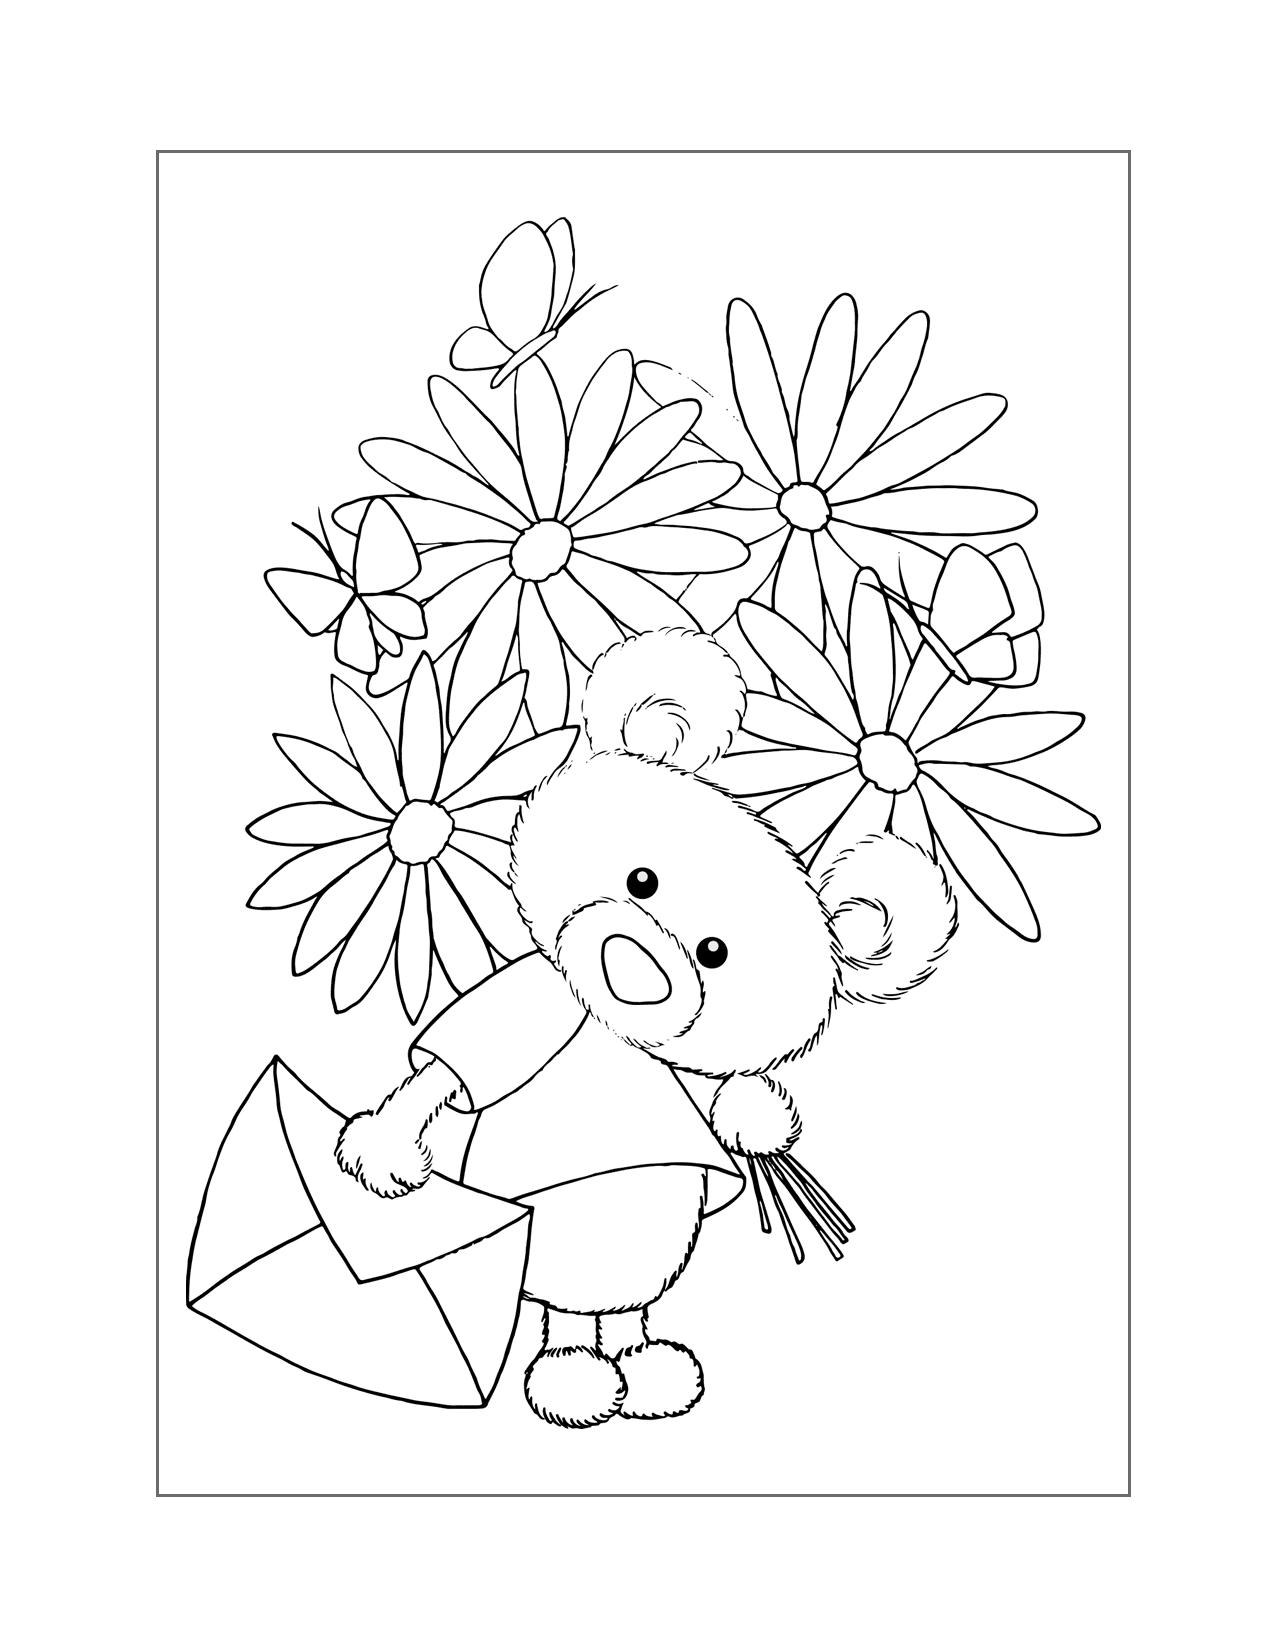 Teddy Bear With Flowers Coloring Page